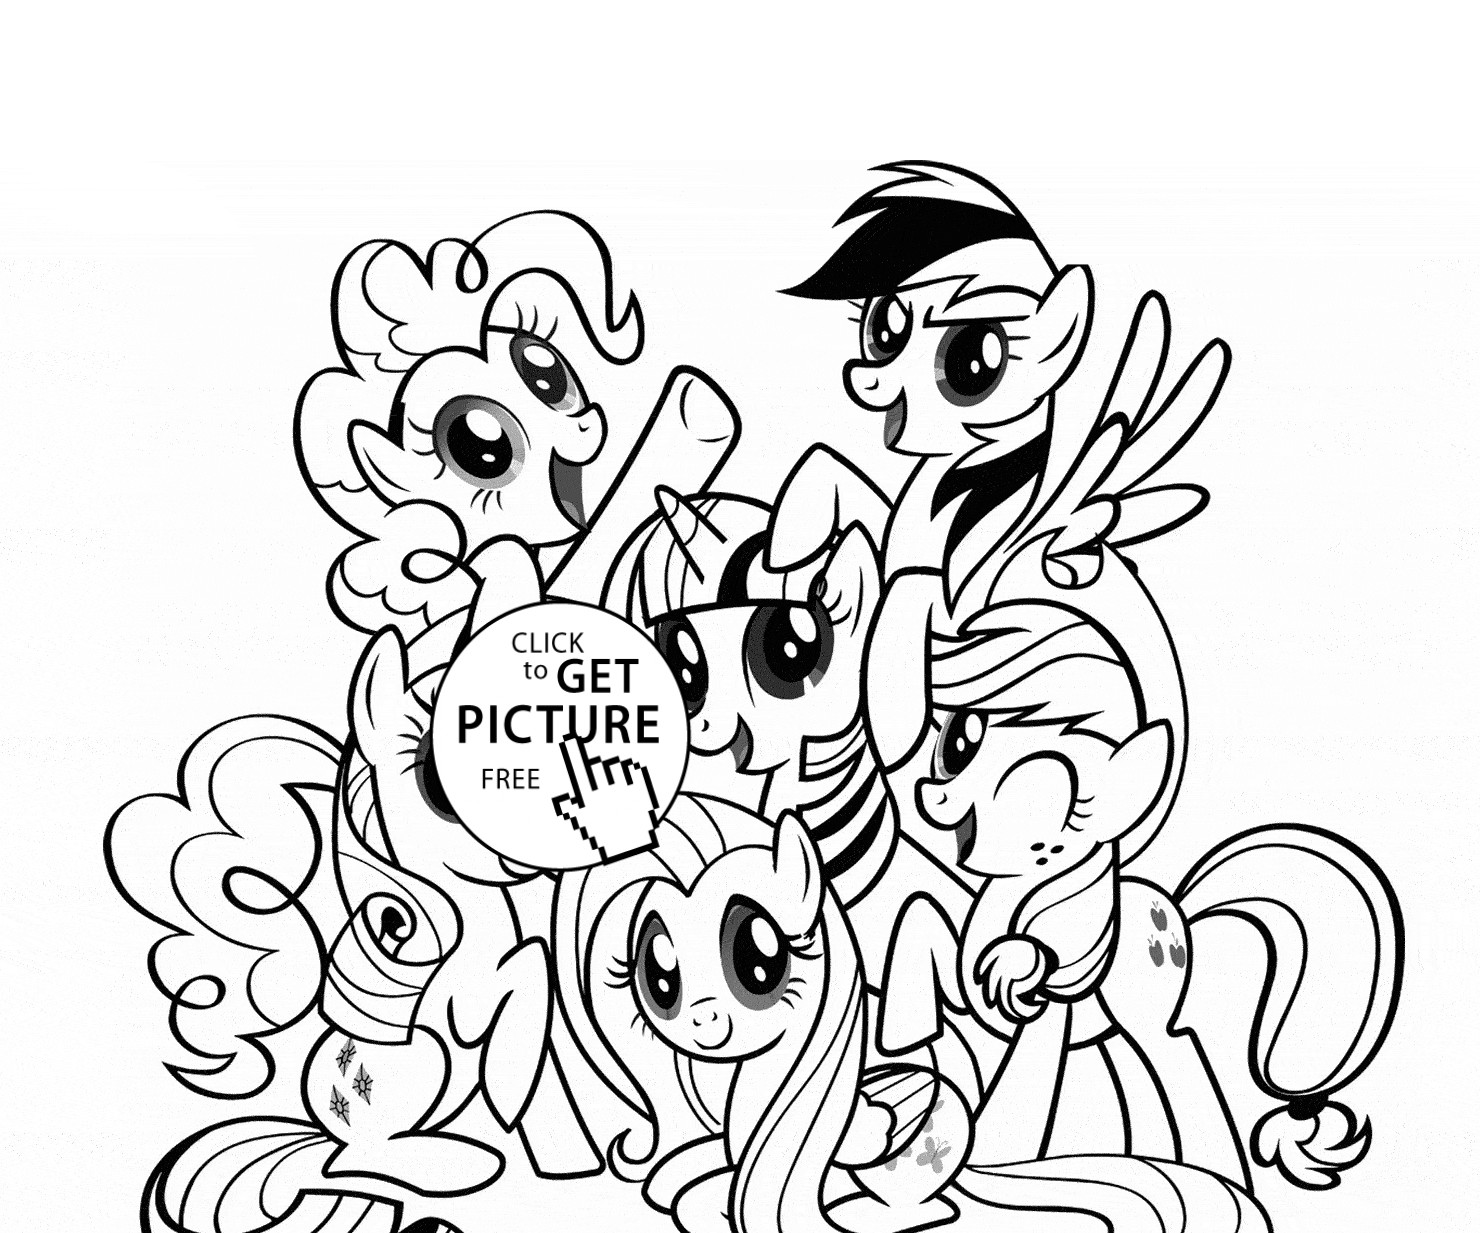 Coloring Sheets For Girls My Little Pony
 My Little Pony coloring page for kids for girls coloring